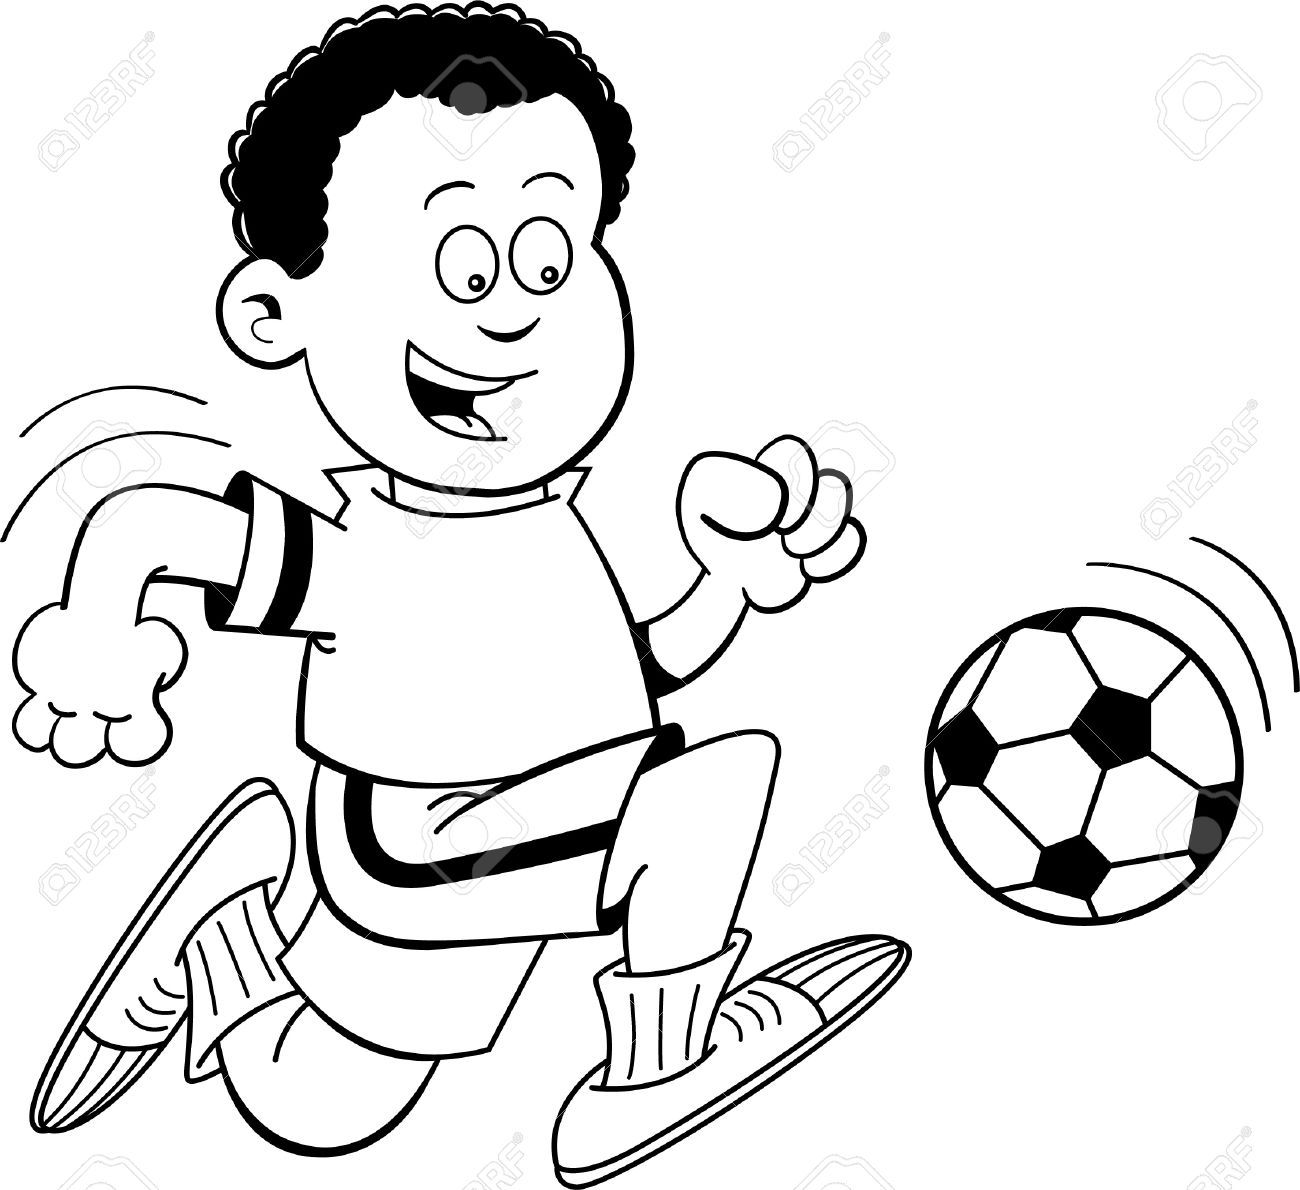 Kids playing sports clipart black and white